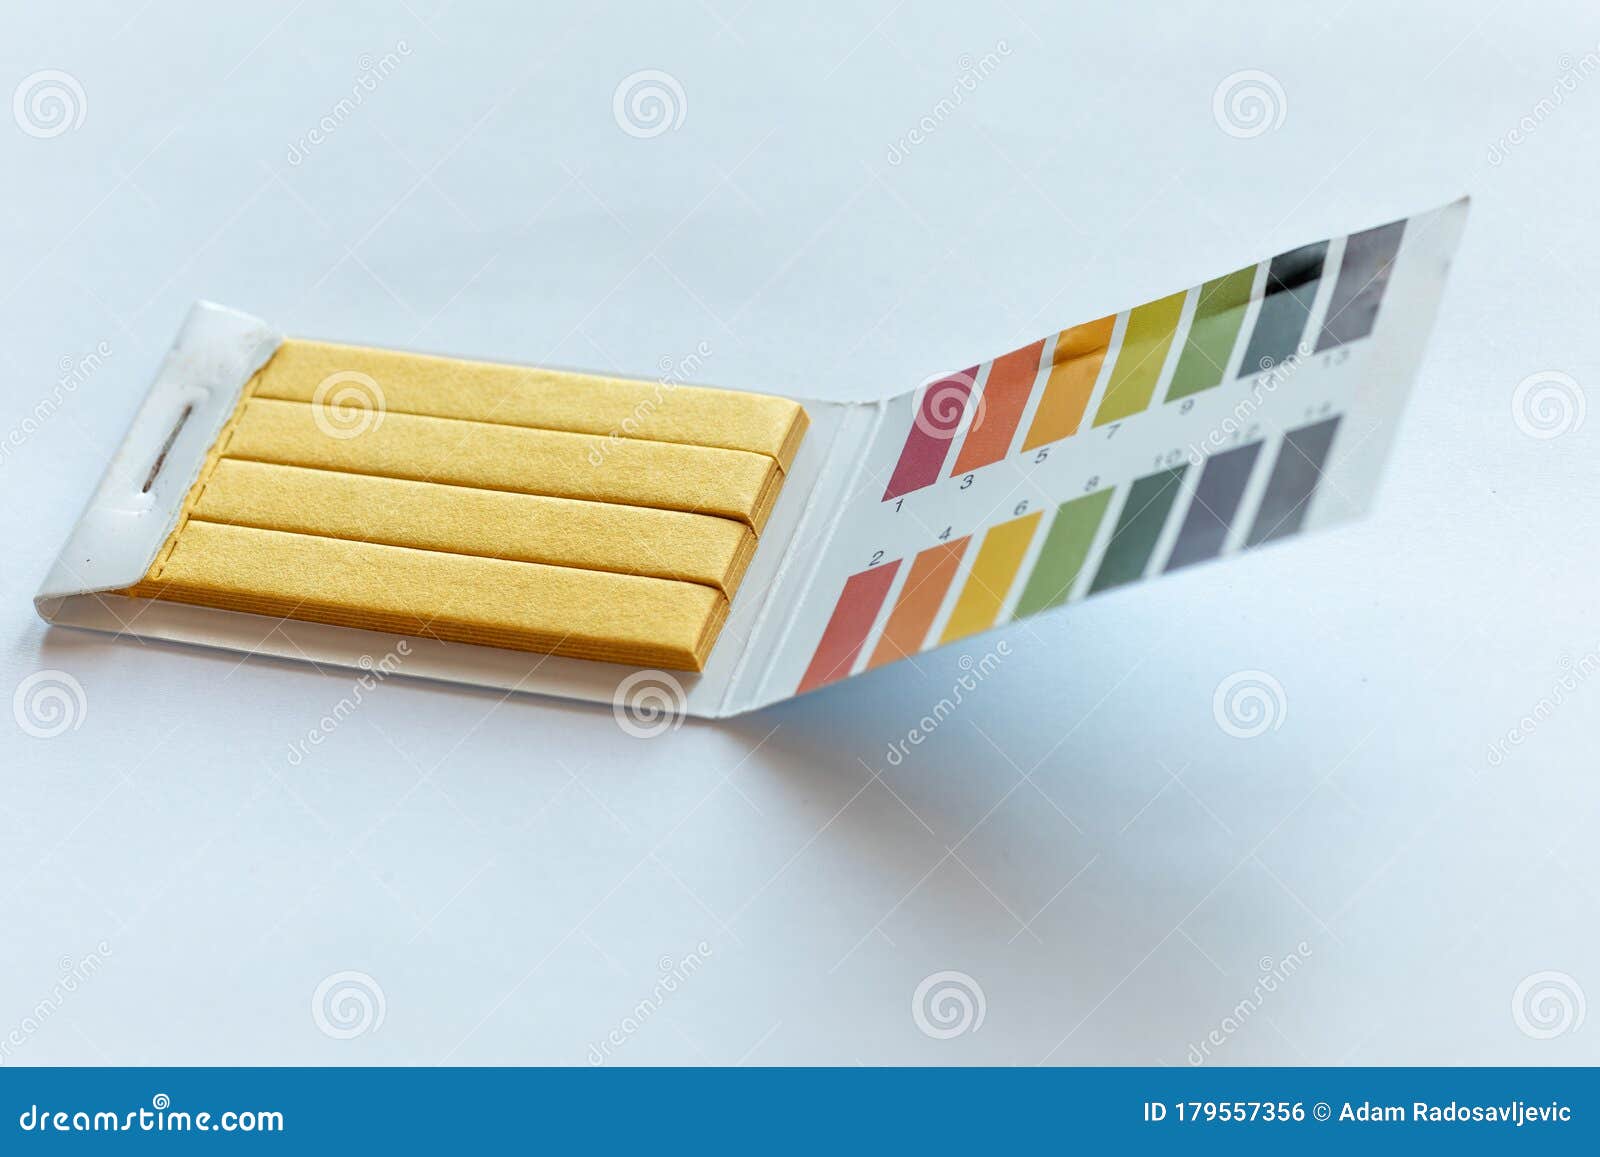 PH test with universal indicator paper - Stock Image - C033/2862